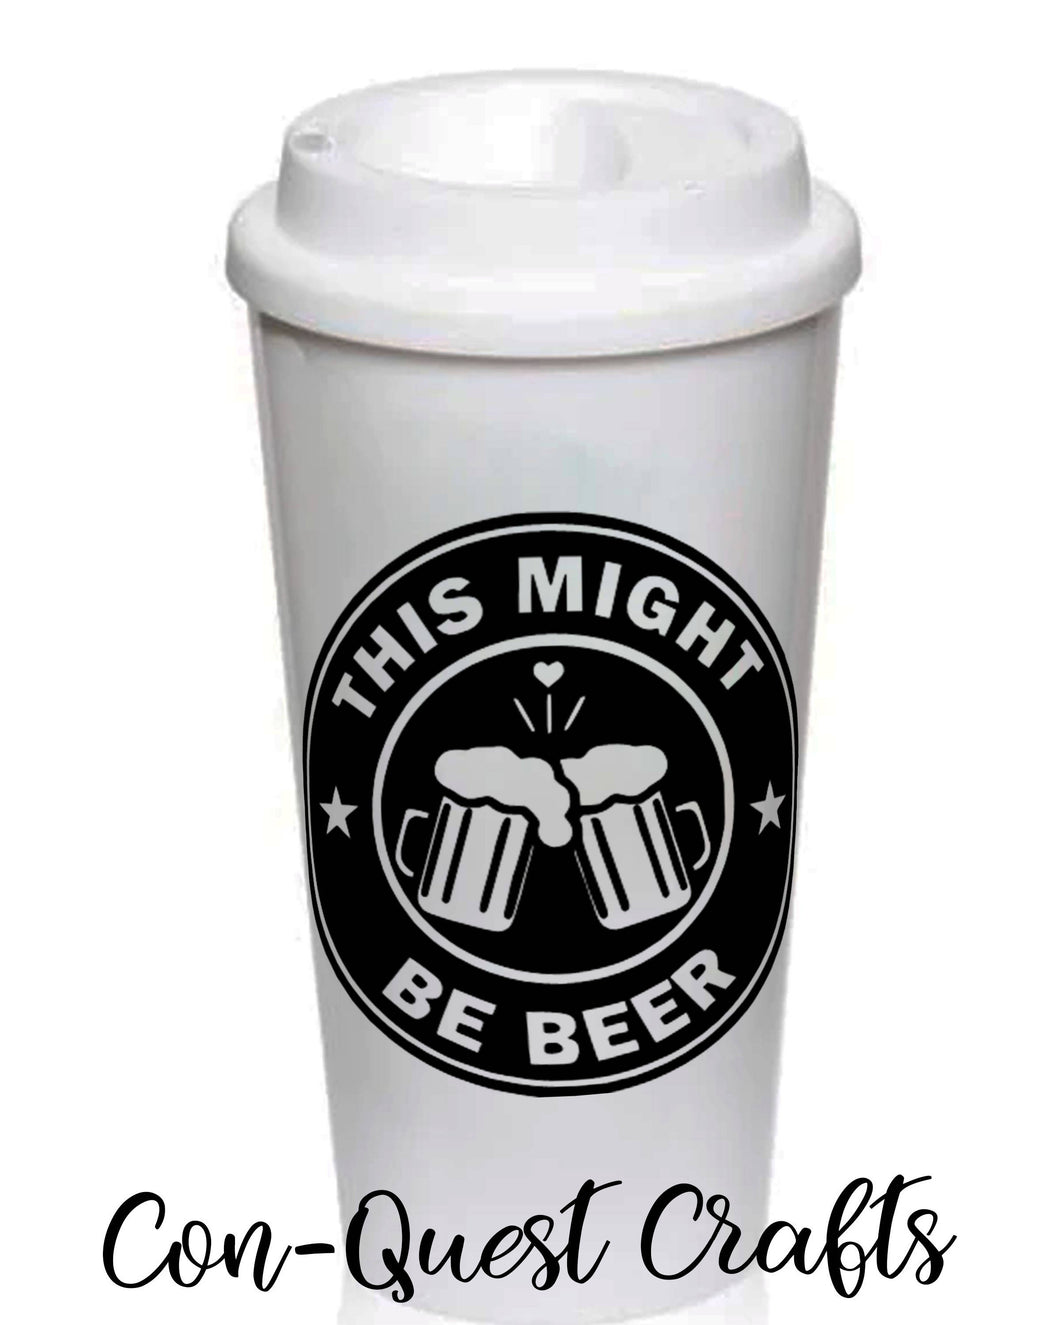 This Might Be Beer Permanent Decal - DECAL ONLY